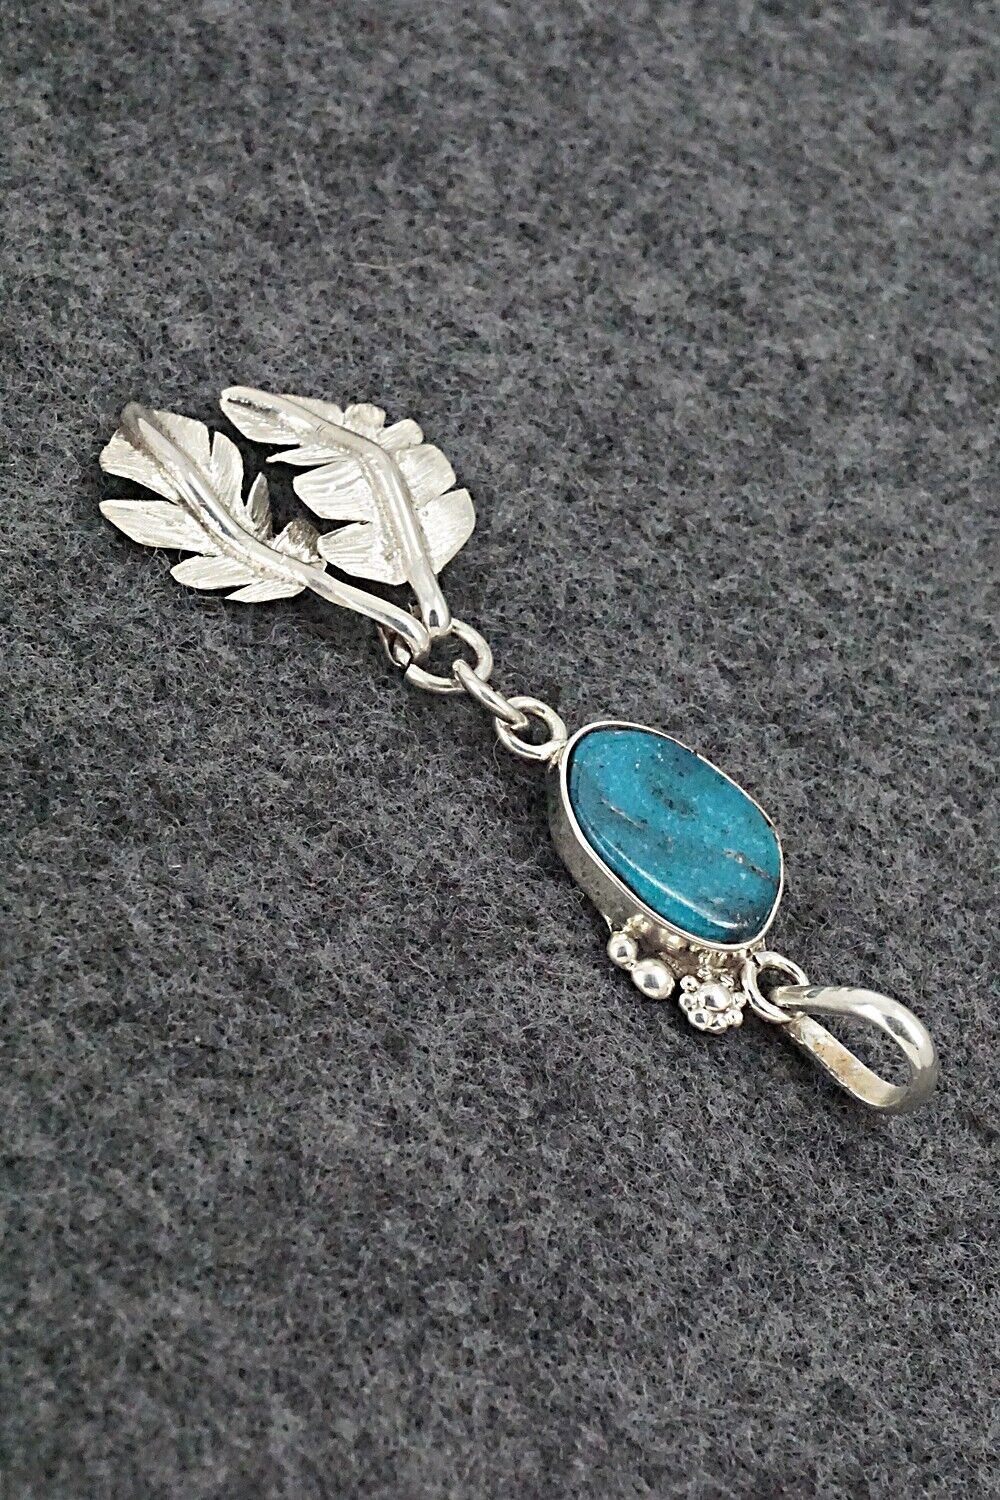 Turquoise & Sterling Silver Pendant - Tammy Deysee